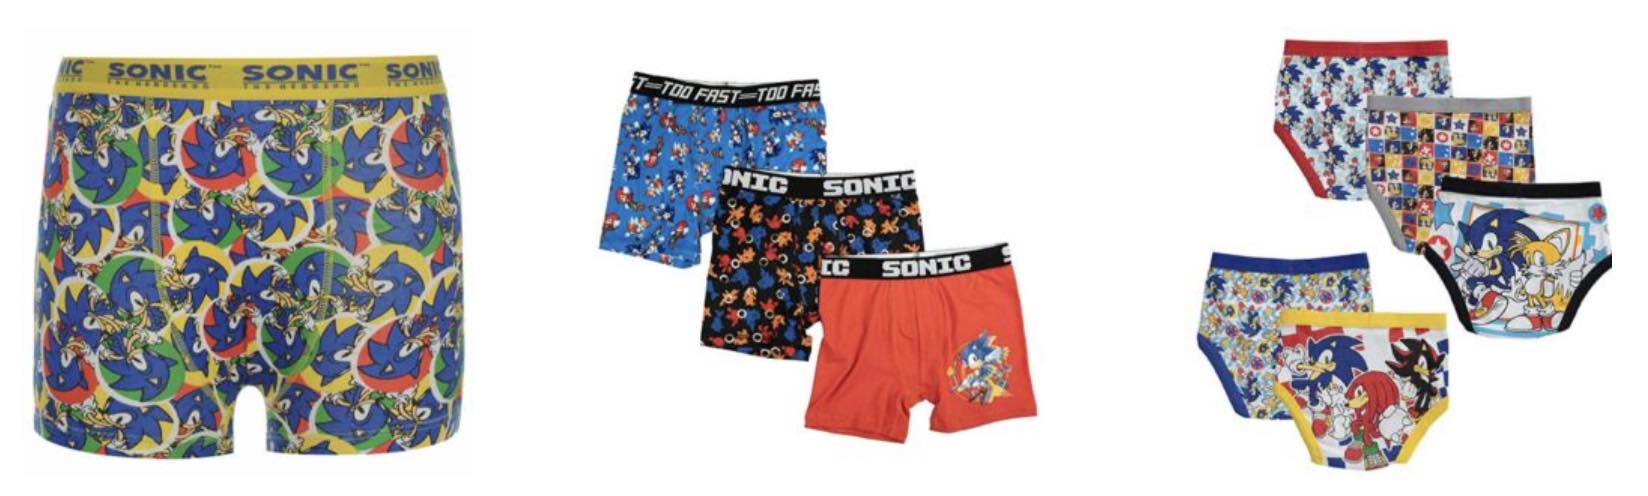 SONIC THE HEDGEHOG Ragazzi Sonic nocche Tails 3 PACK ATHLETIC Boxer 